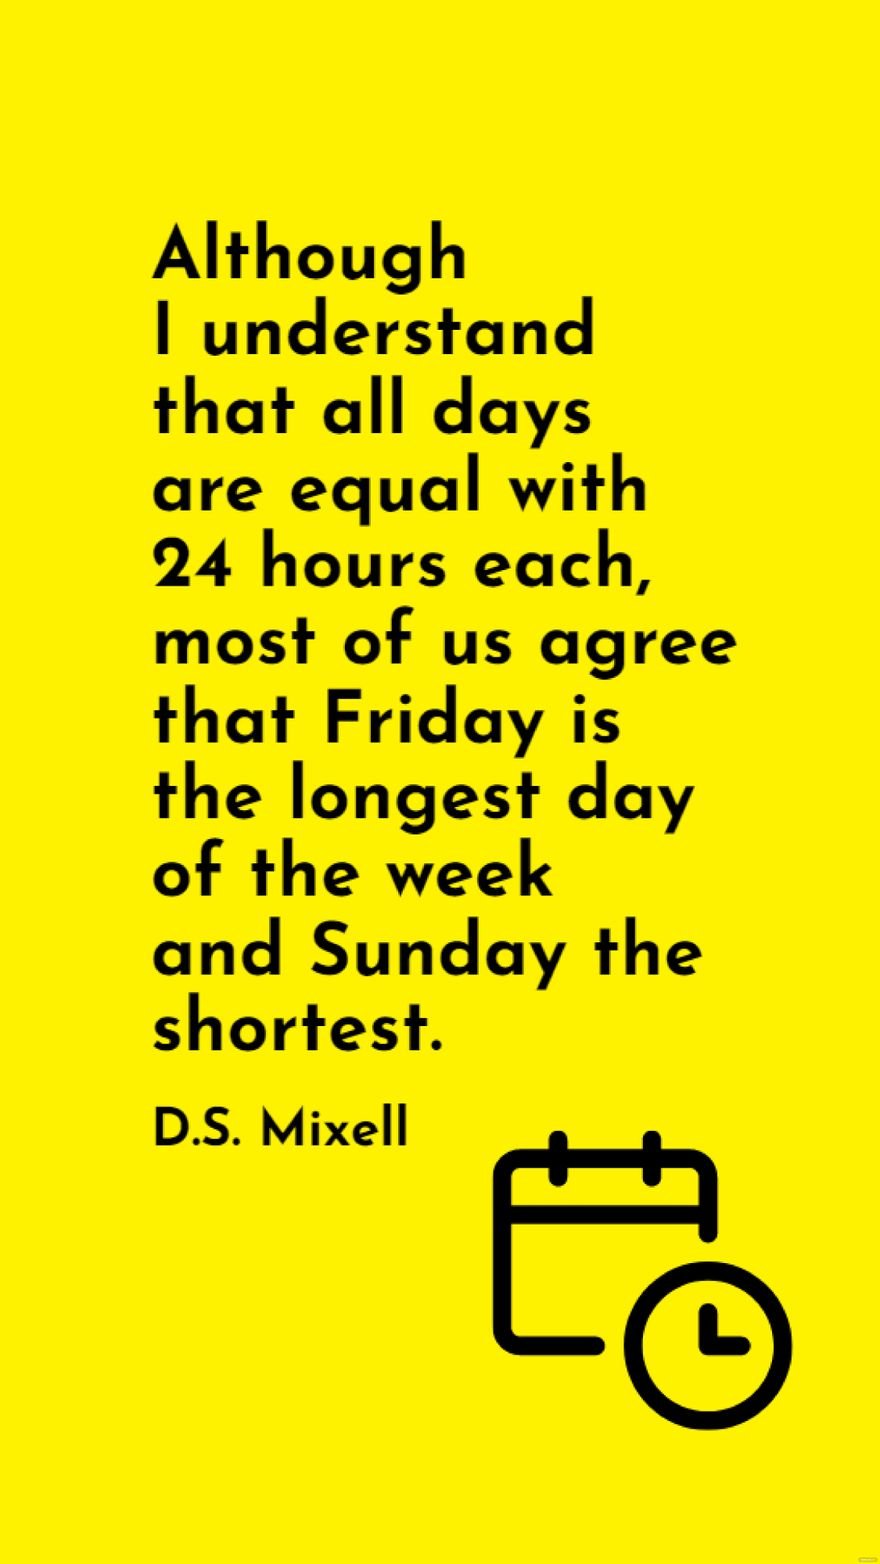 Free D.S. Mixell - Although I understand that all days are equal with 24 hours each, most of us agree that Friday is the longest day of the week and Sunday the shortest.